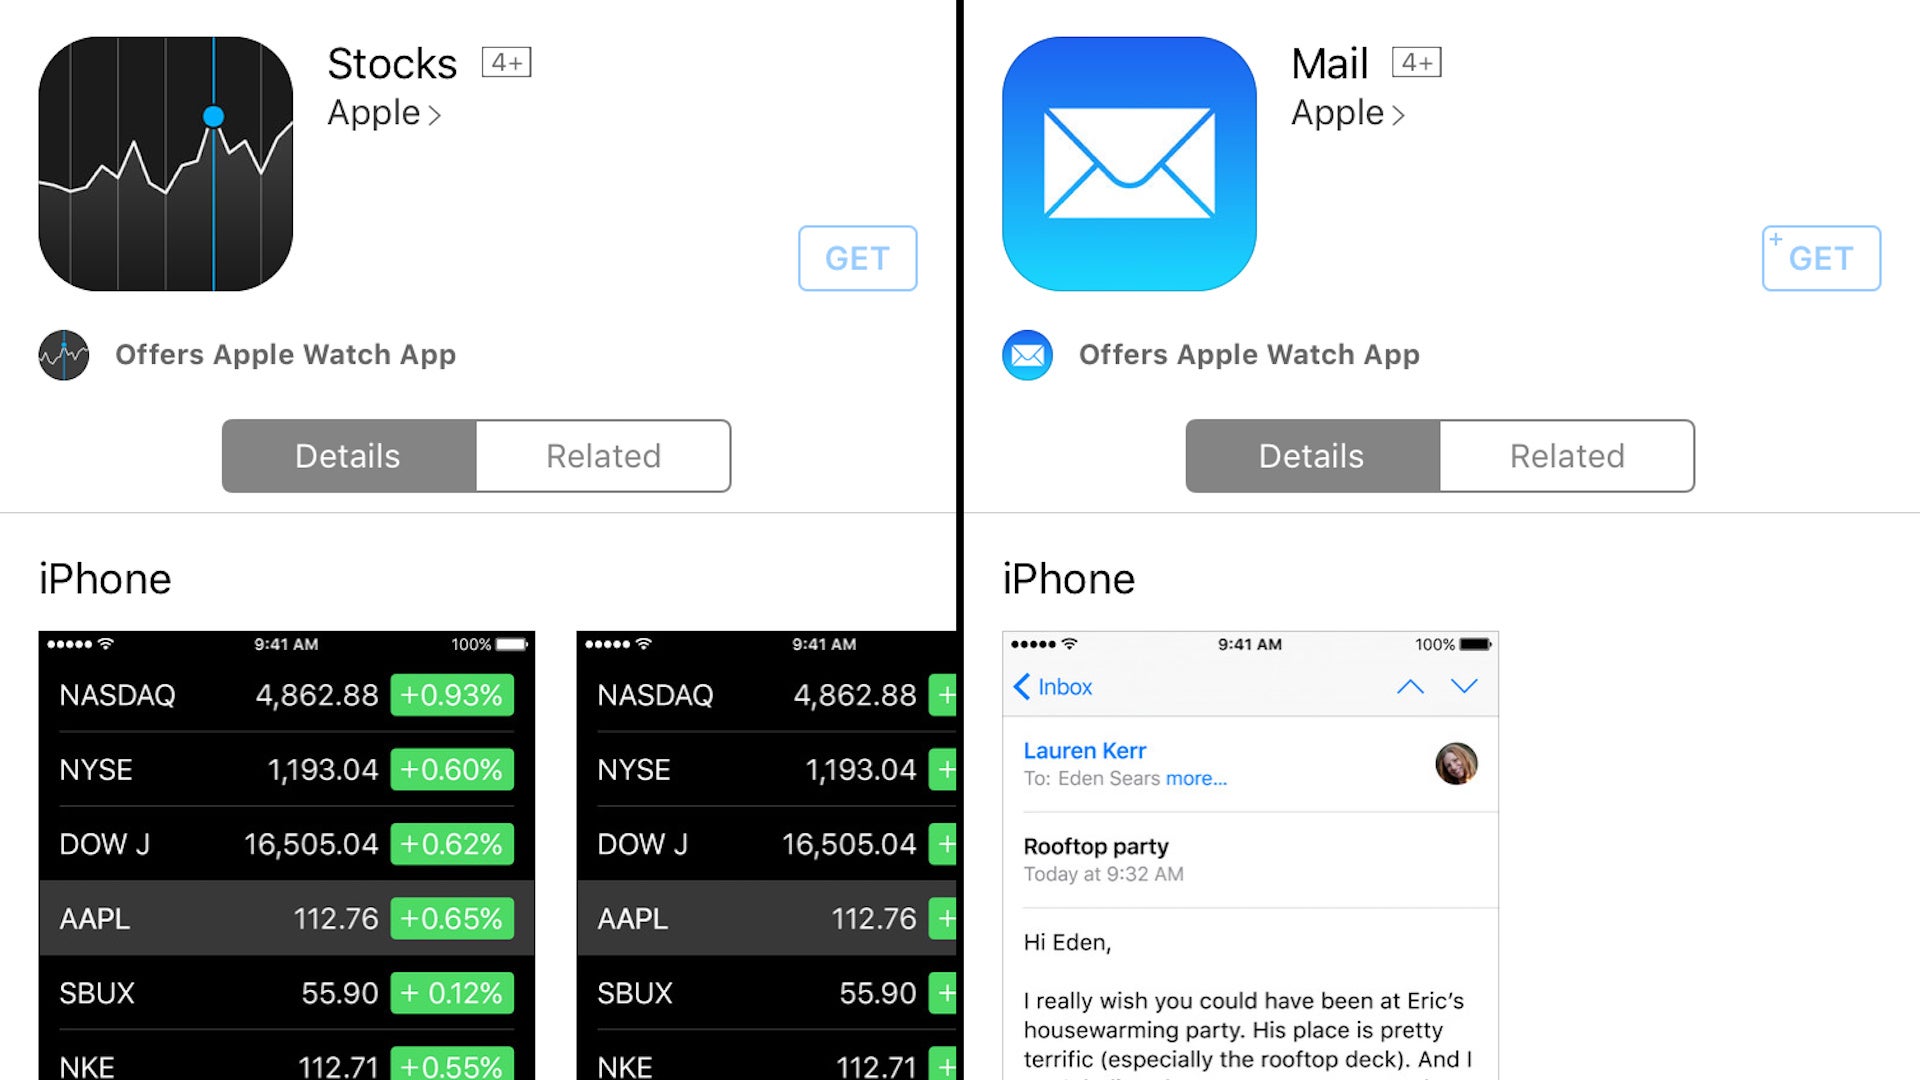 Yes, you will be able to uninstall stock apps like Mail and Calendar in iOS 10